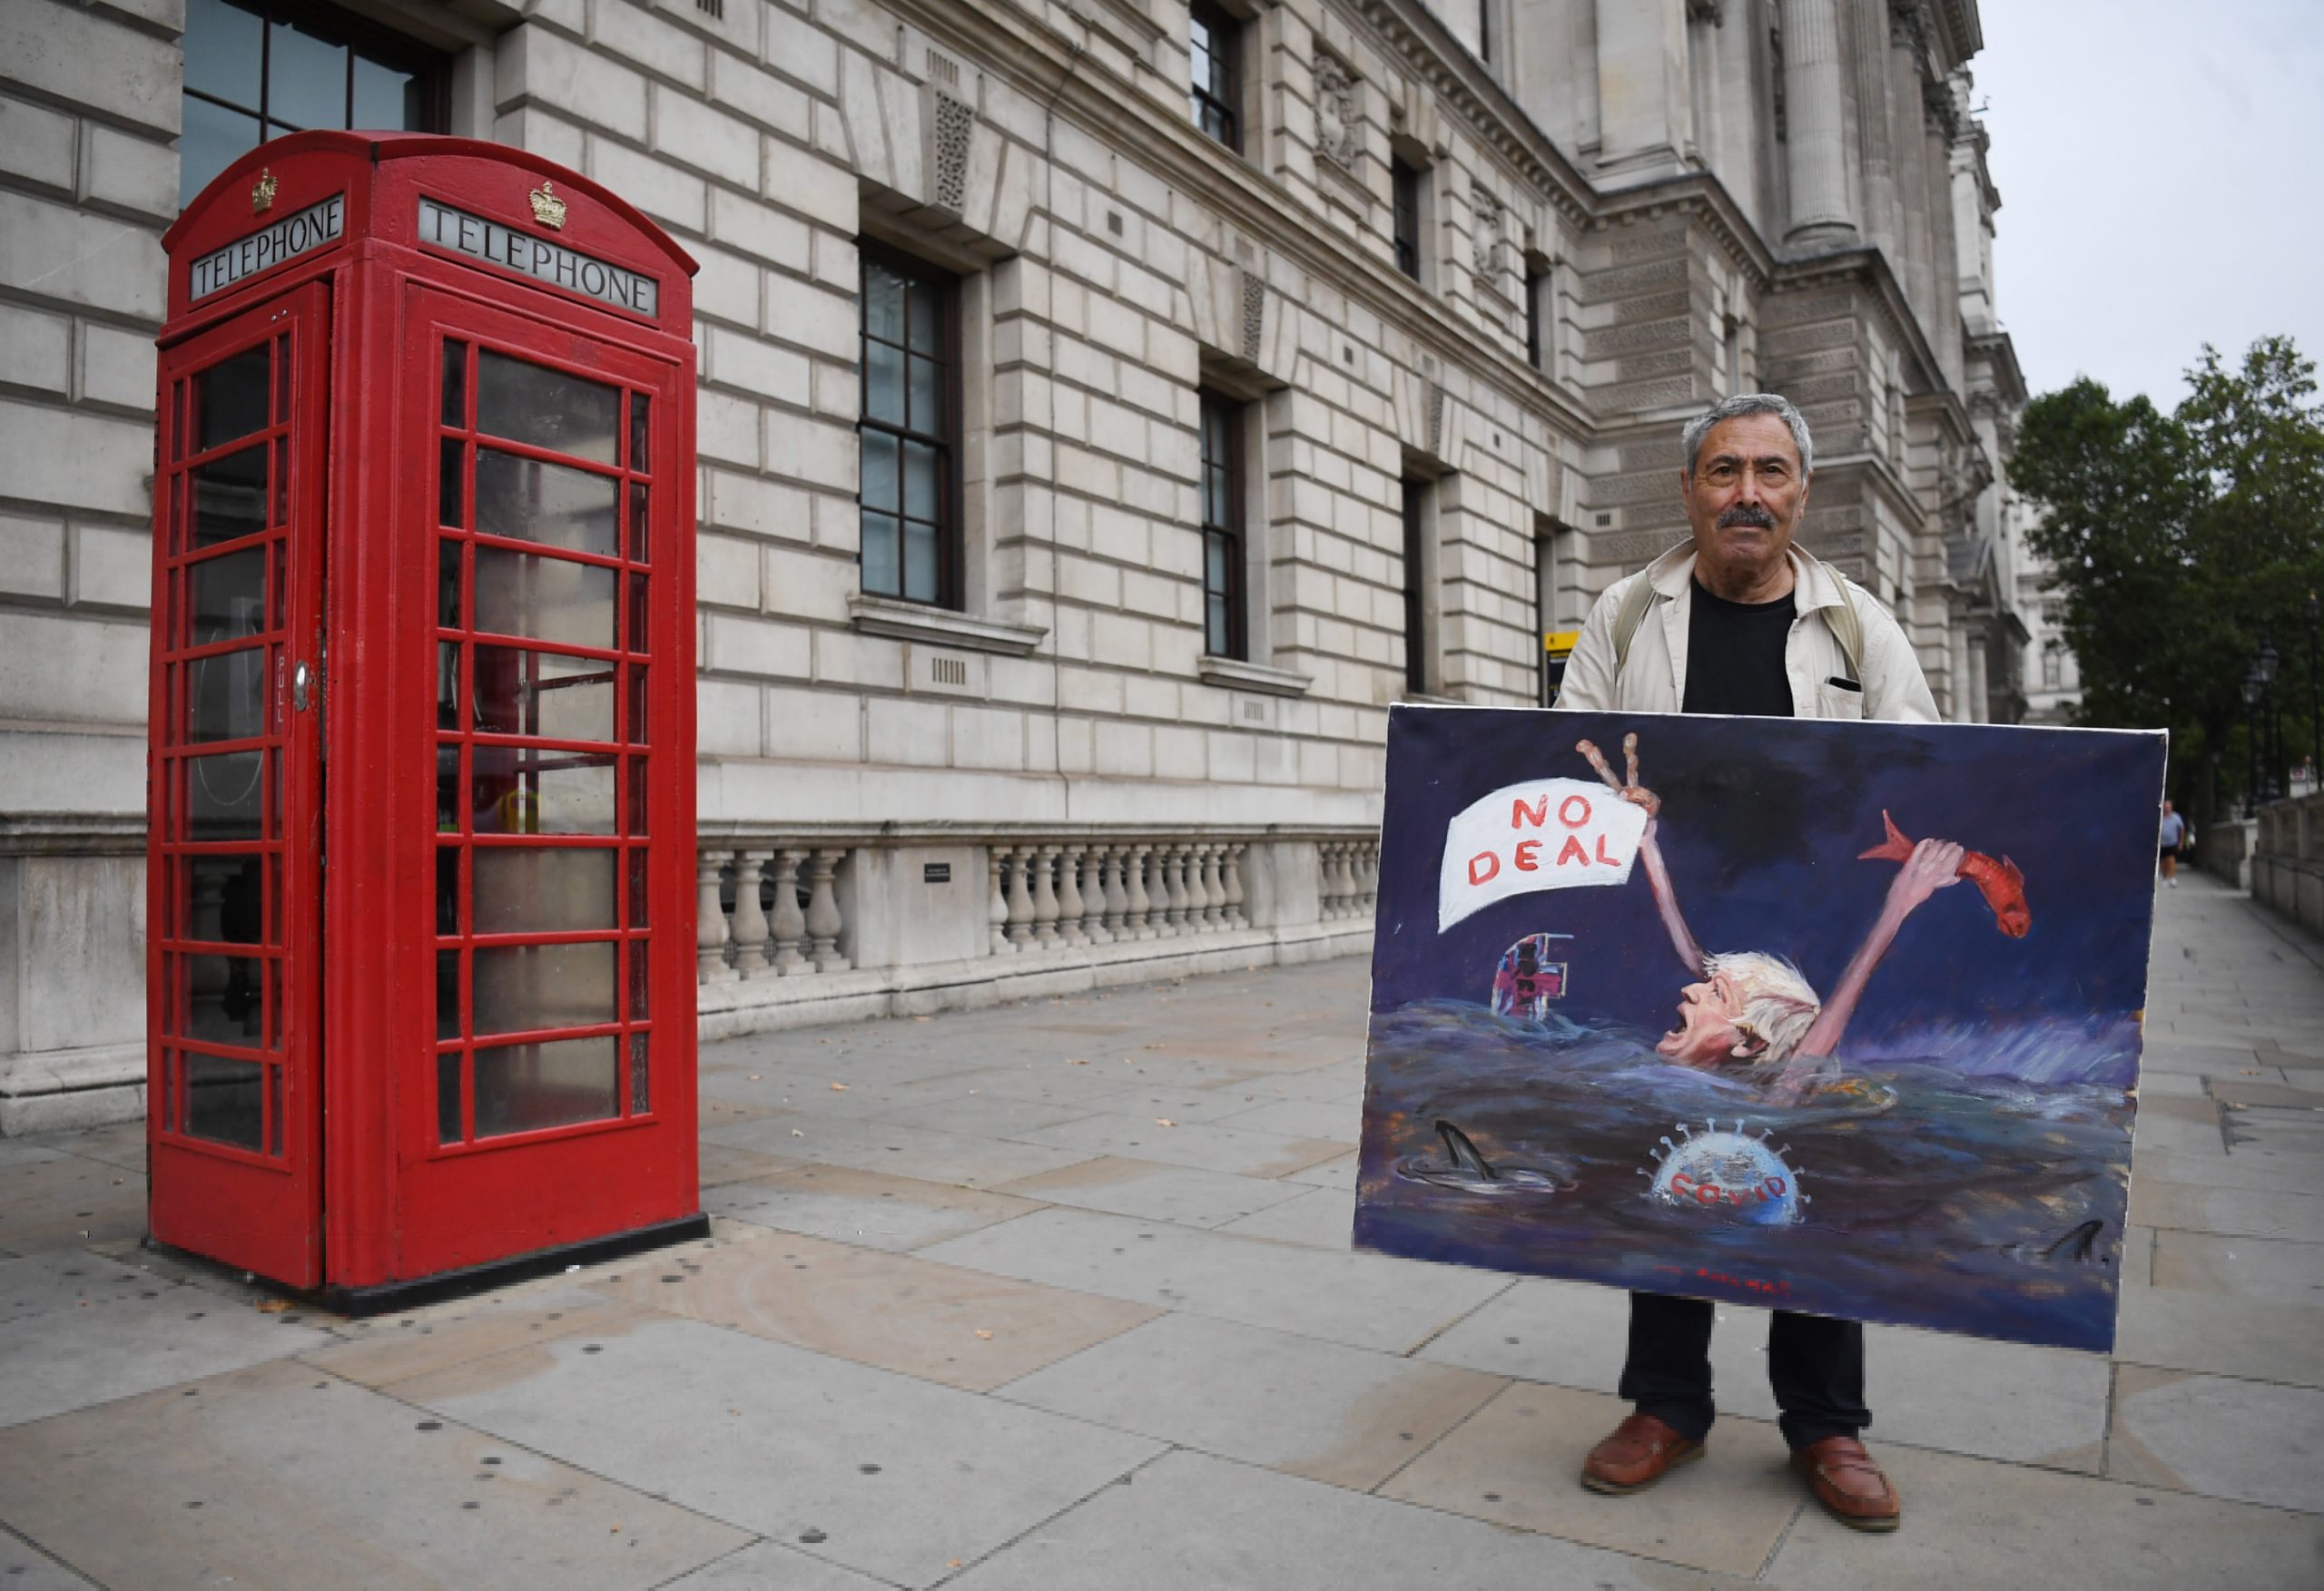 epa08656785 British satirical artist Kaya Mar poses with a painting in Westminster for the next round of Brexit talks in London, Britain, 09 September 2020. British and EU negotiators are holding talks this week to try thrash out a Brexit deal before a looming October deadline.  EPA/NEIL HALL